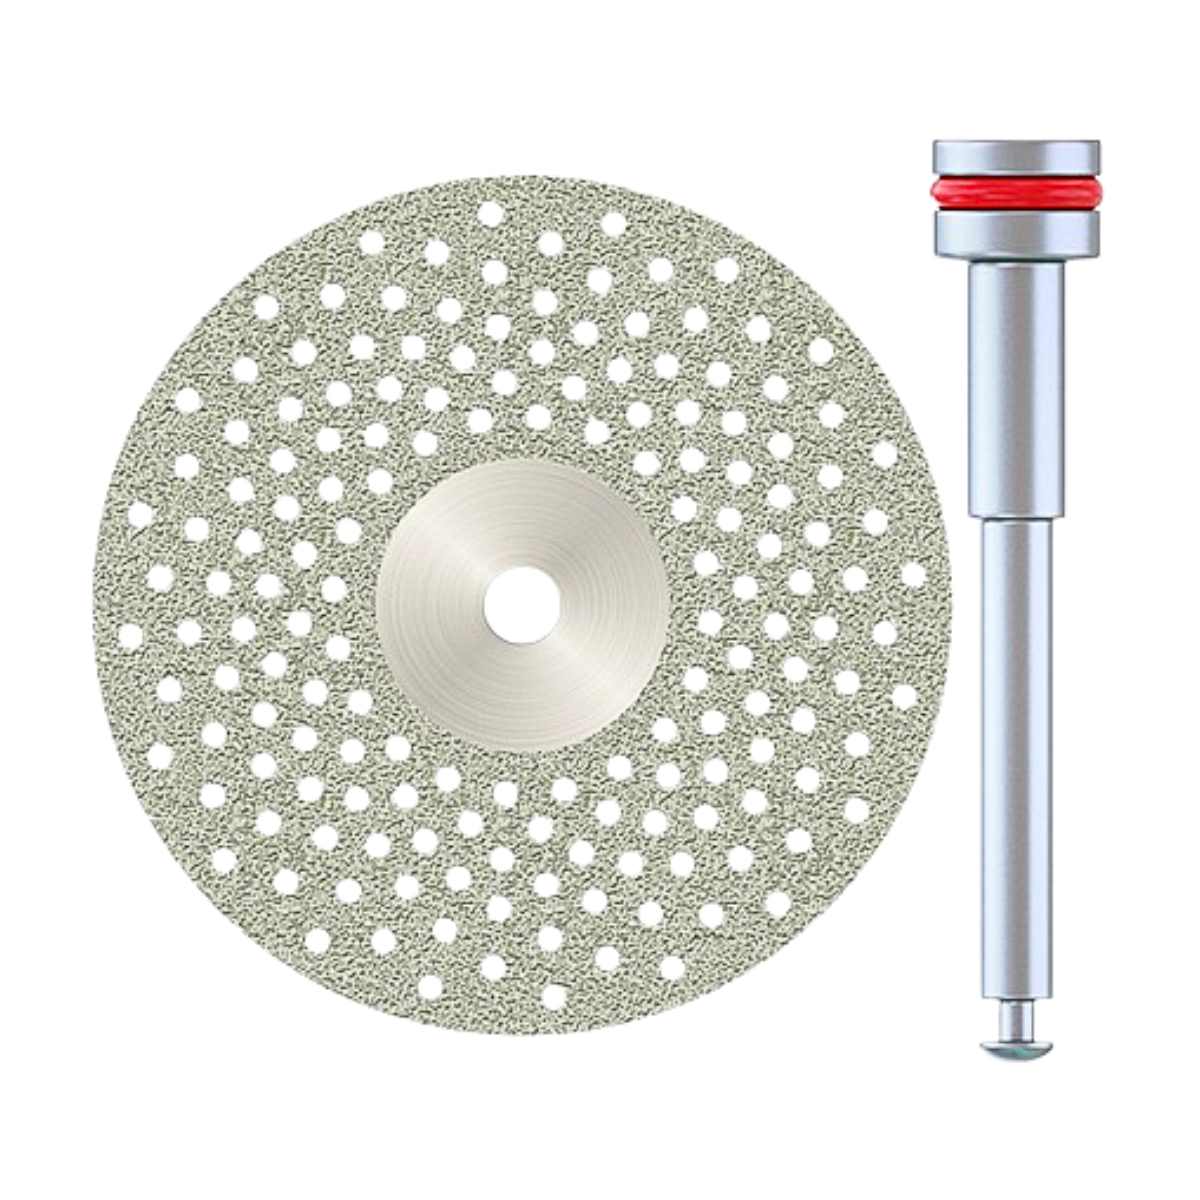 DSI Flexible Diamond Separator IPR Disc Double Sided T10 With Slots 22mm